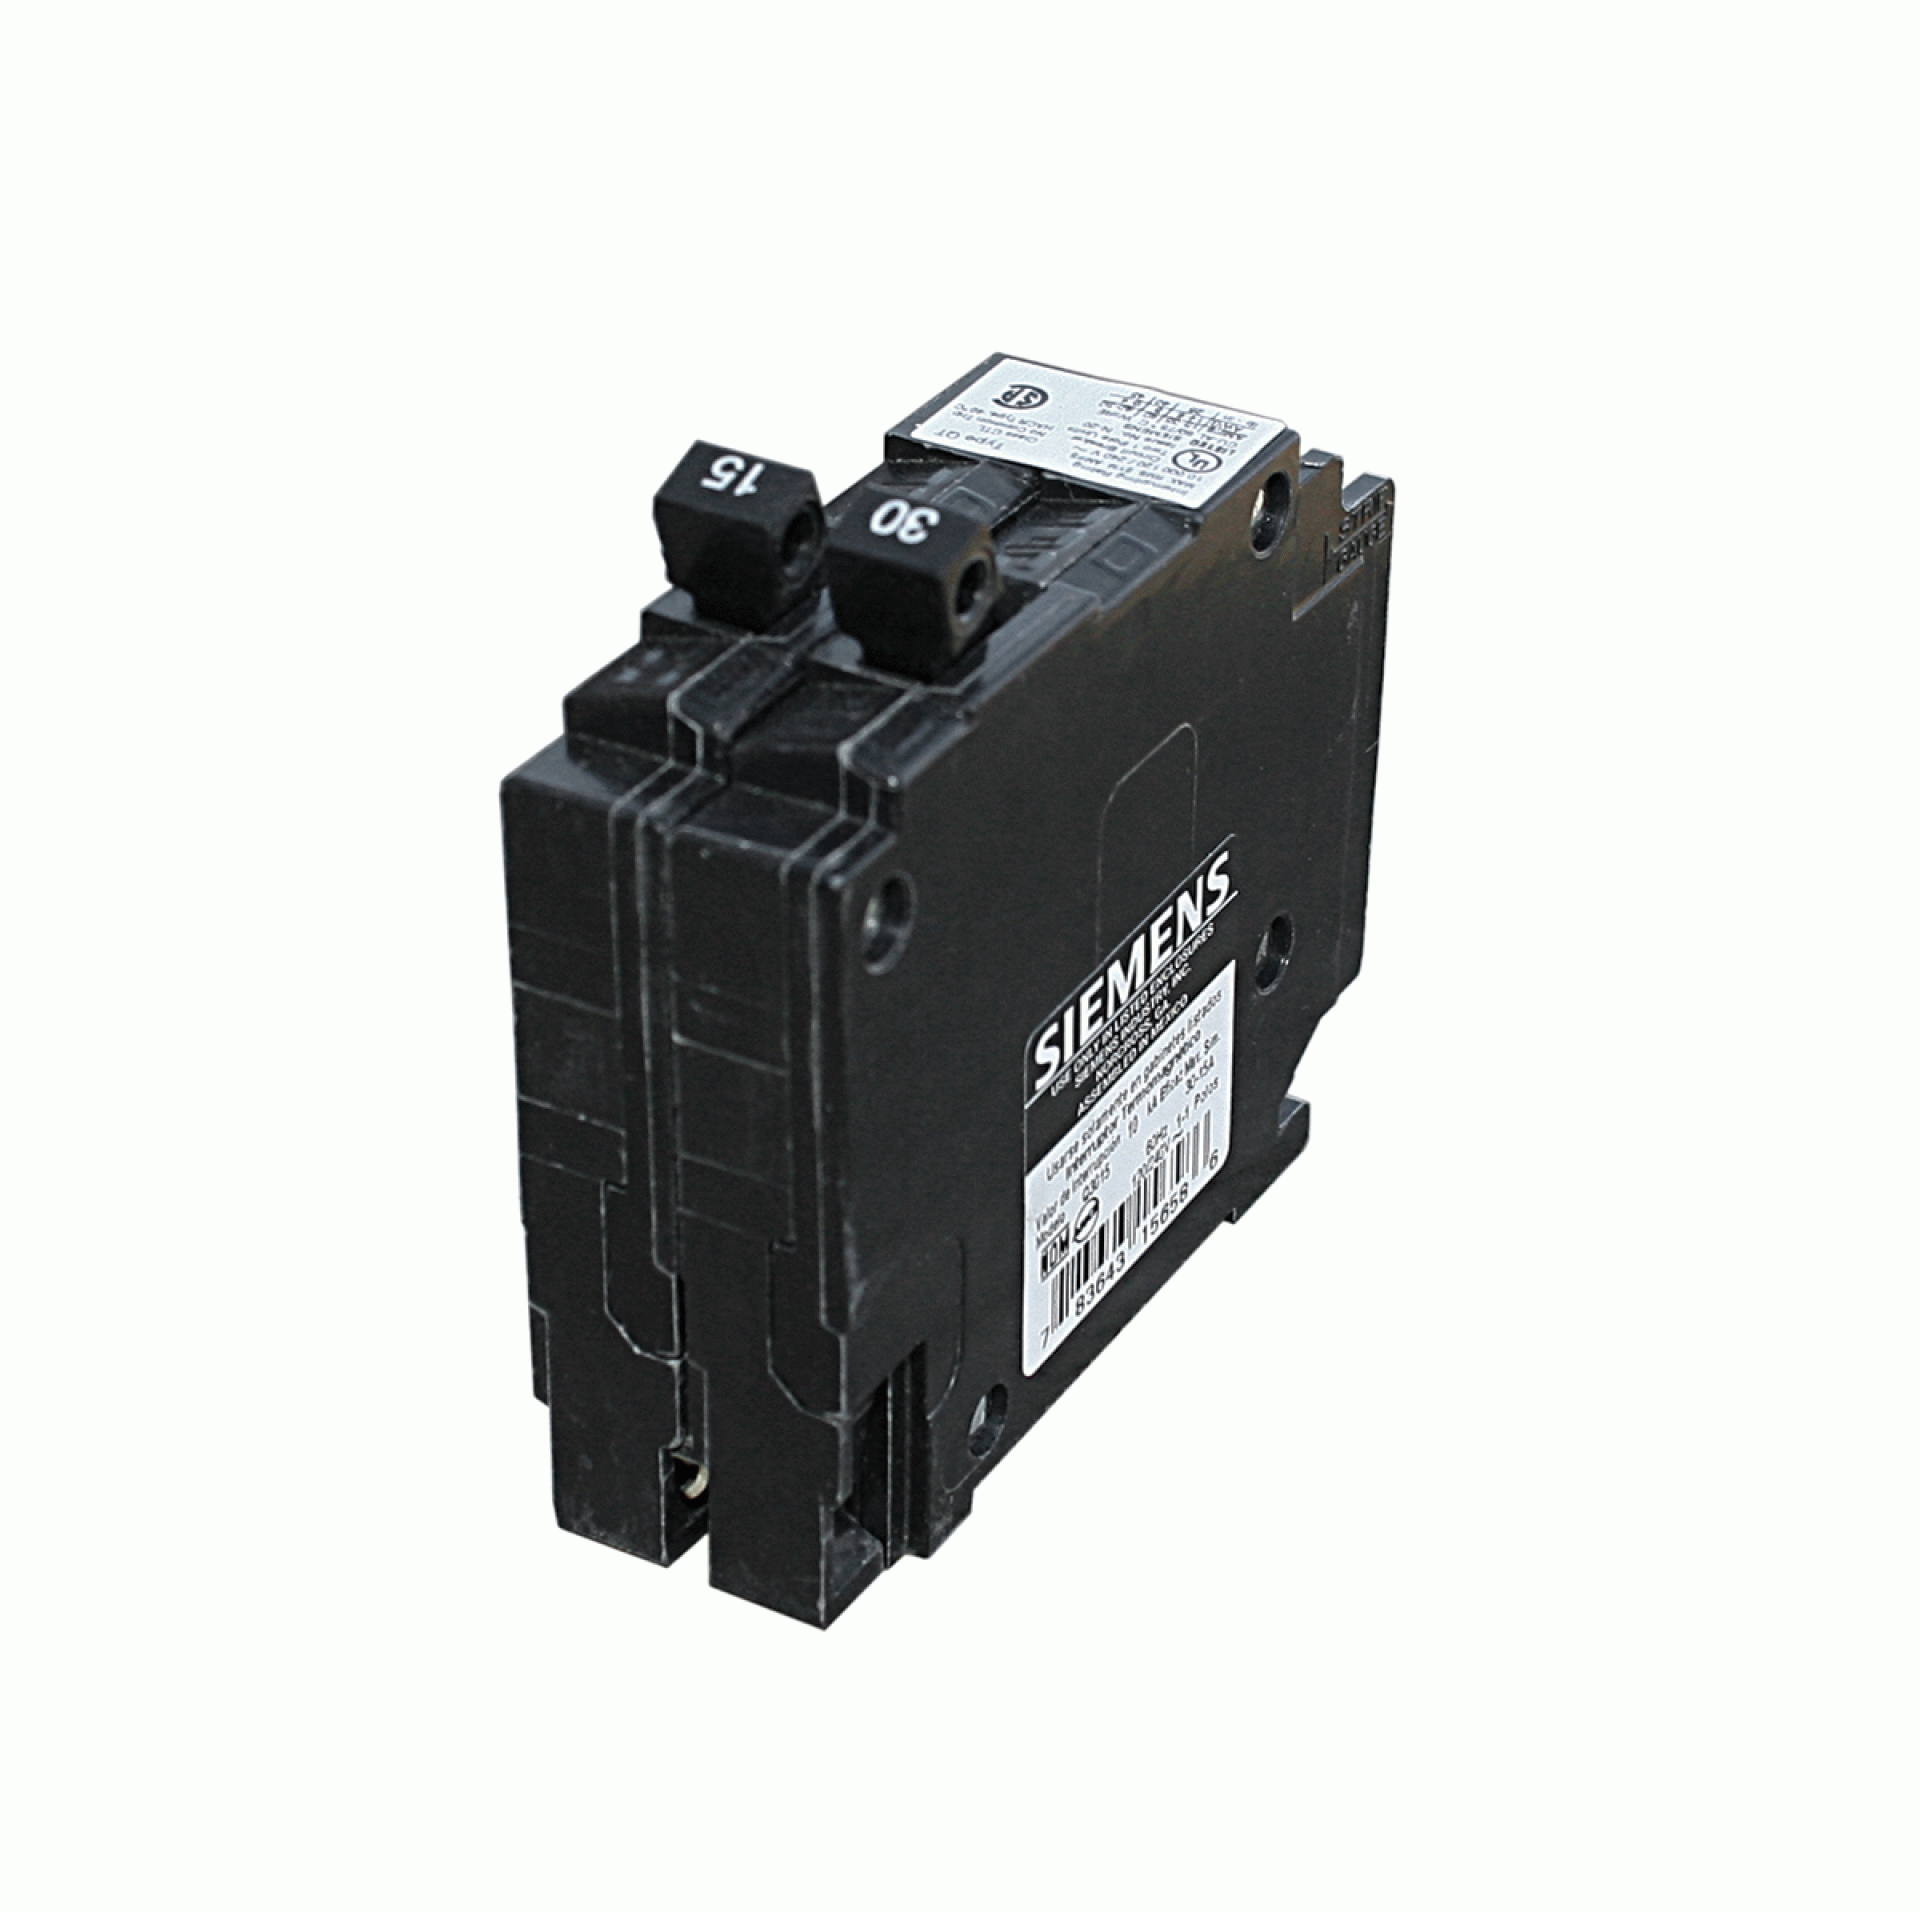 PARALLAX POWER SUPPLY | ITEQ3015 | Circuit Breaker - Twin Pole - 15A/30A